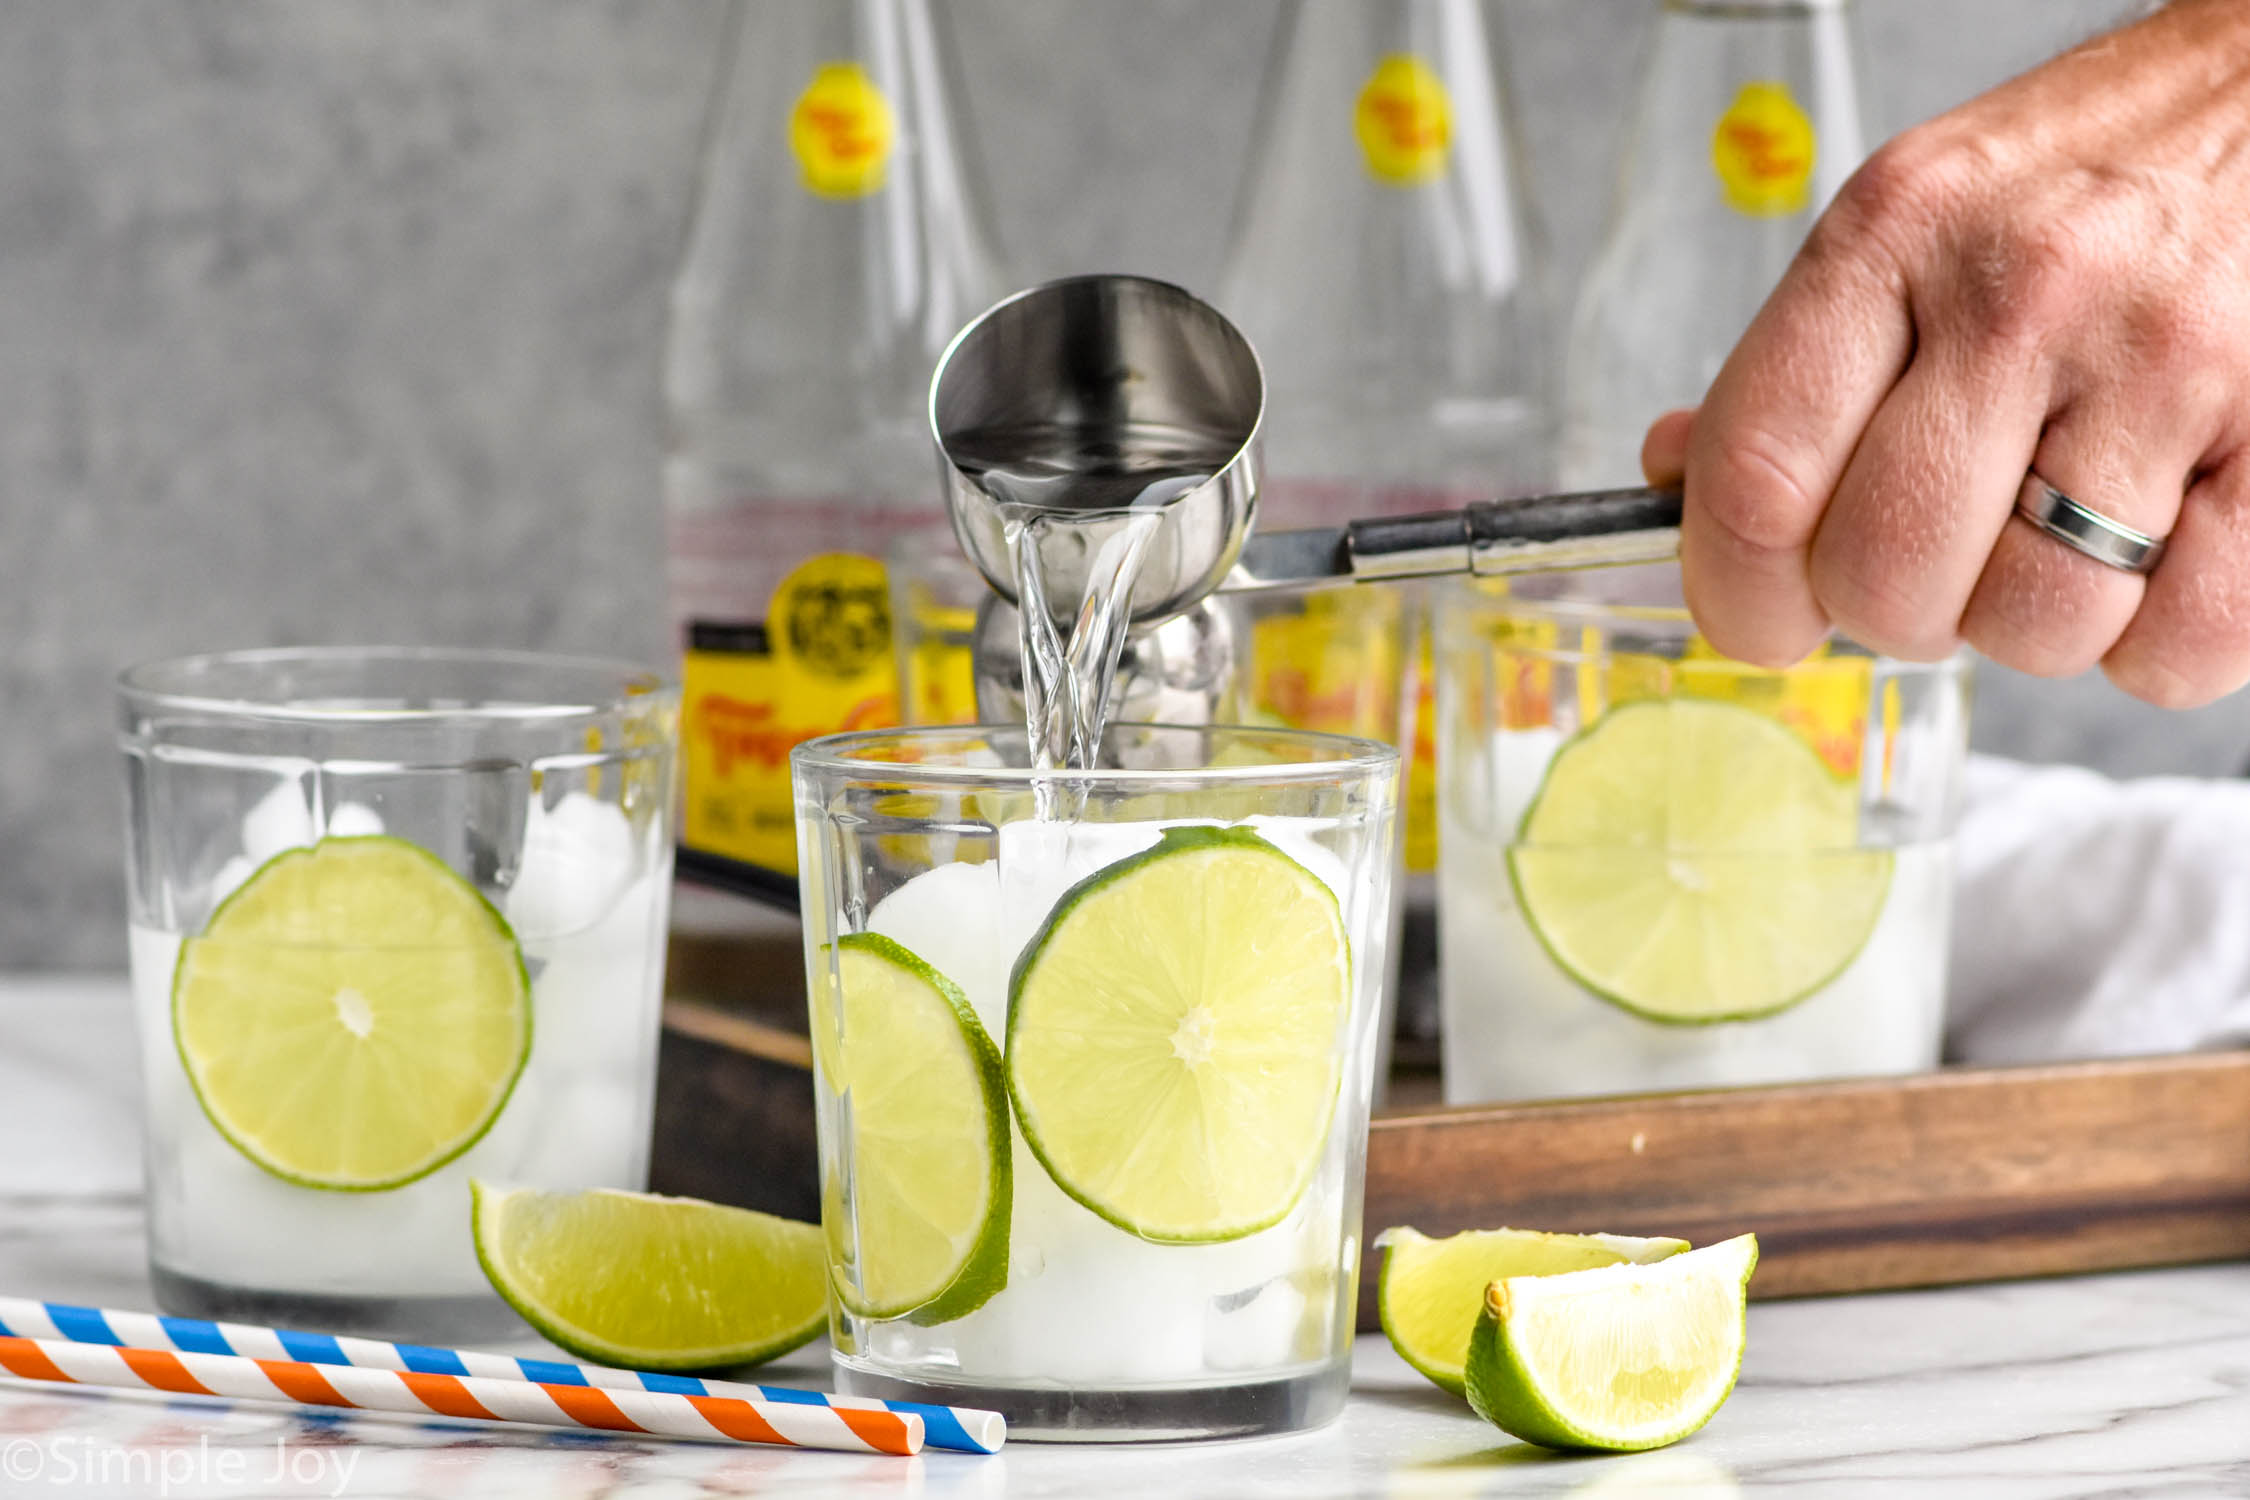 man's hand pouring cocktail jigger of tequila into a glass of ice and slices of lime to make ranch water drink. Ranch water ingredients sitting in background